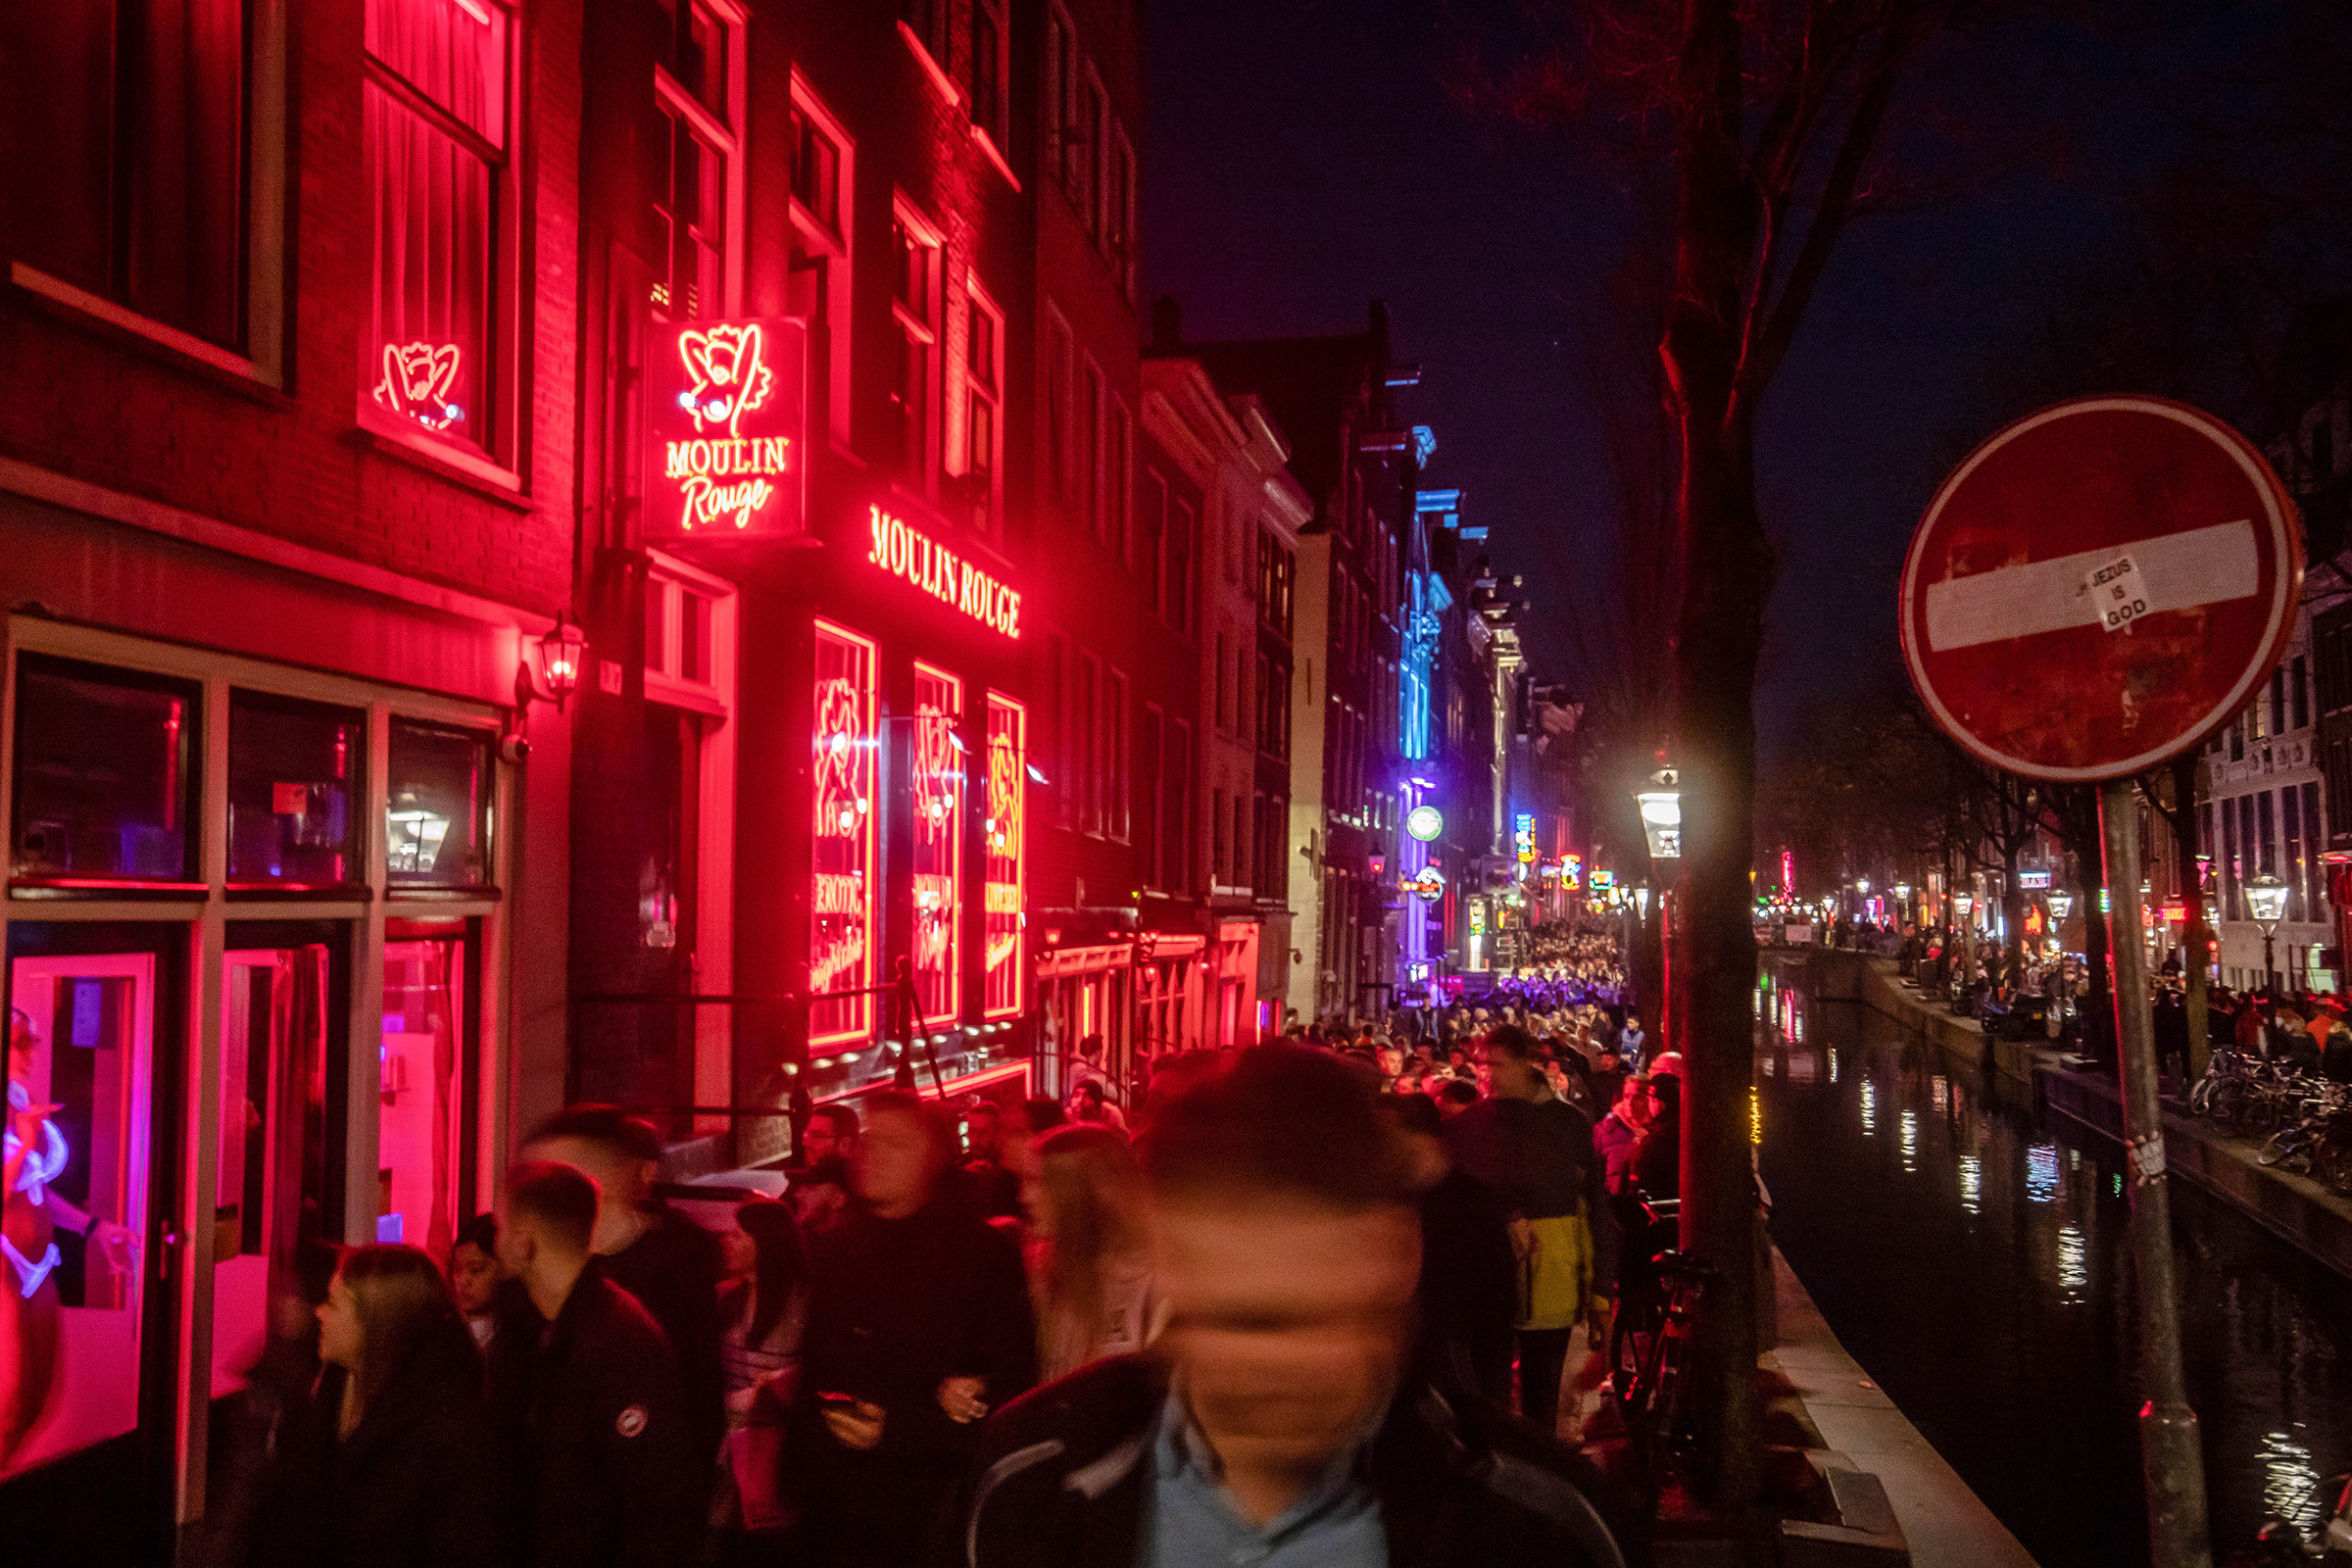 Tourists along the Oudezijds Achterburgwal canal in the red light district in Amsterdam, Netherlands, on April 9. Amsterdam has begun a “Stay Away” campaign aimed at keeping rowdy visitors from descending upon the city. (Peter Boer—Bloomberg/Getty Images)